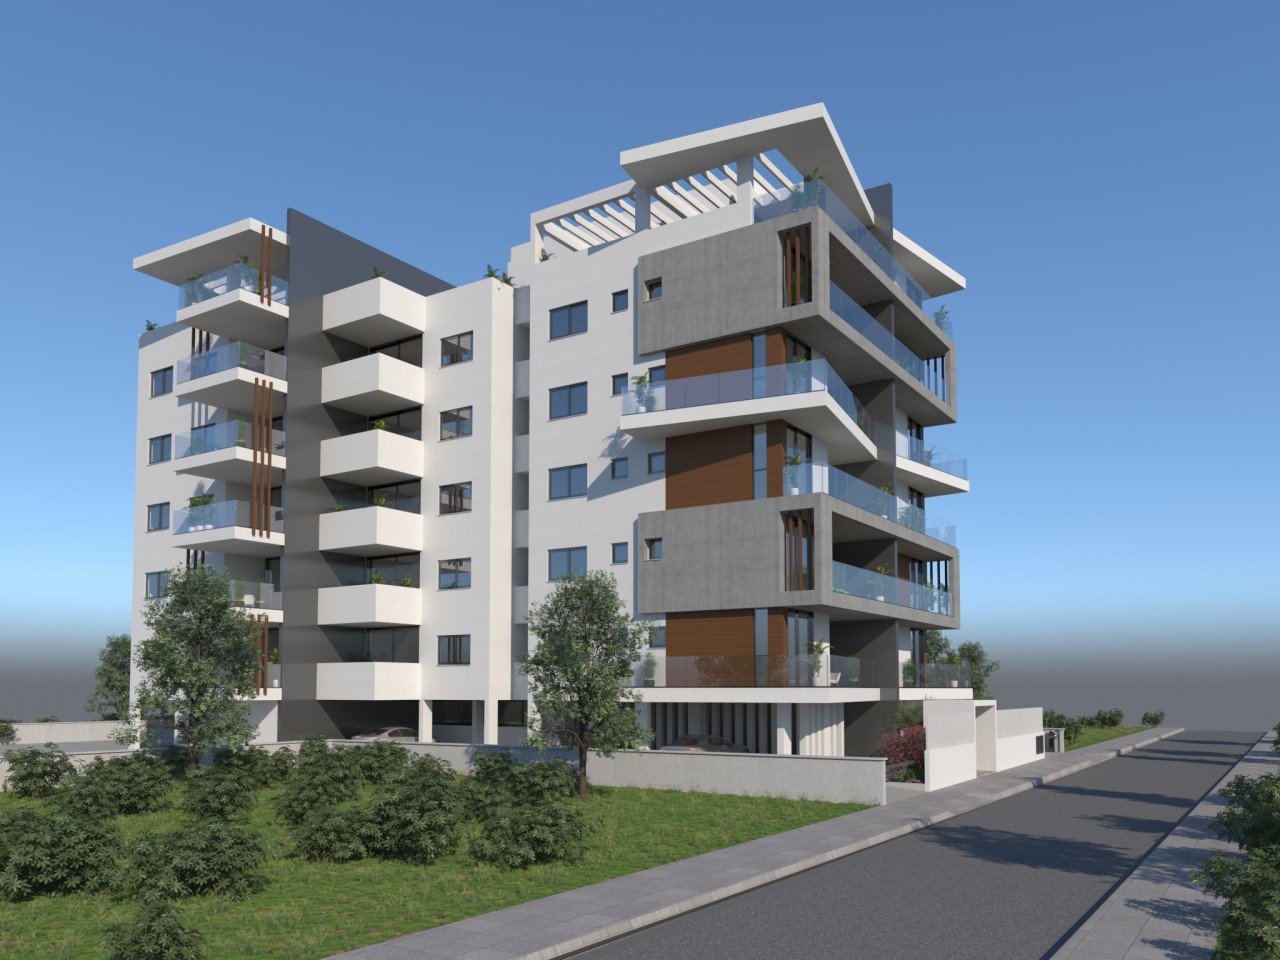 For Sale: Apartment (Flat) in City Center, Limassol  | Key Realtor Cyprus